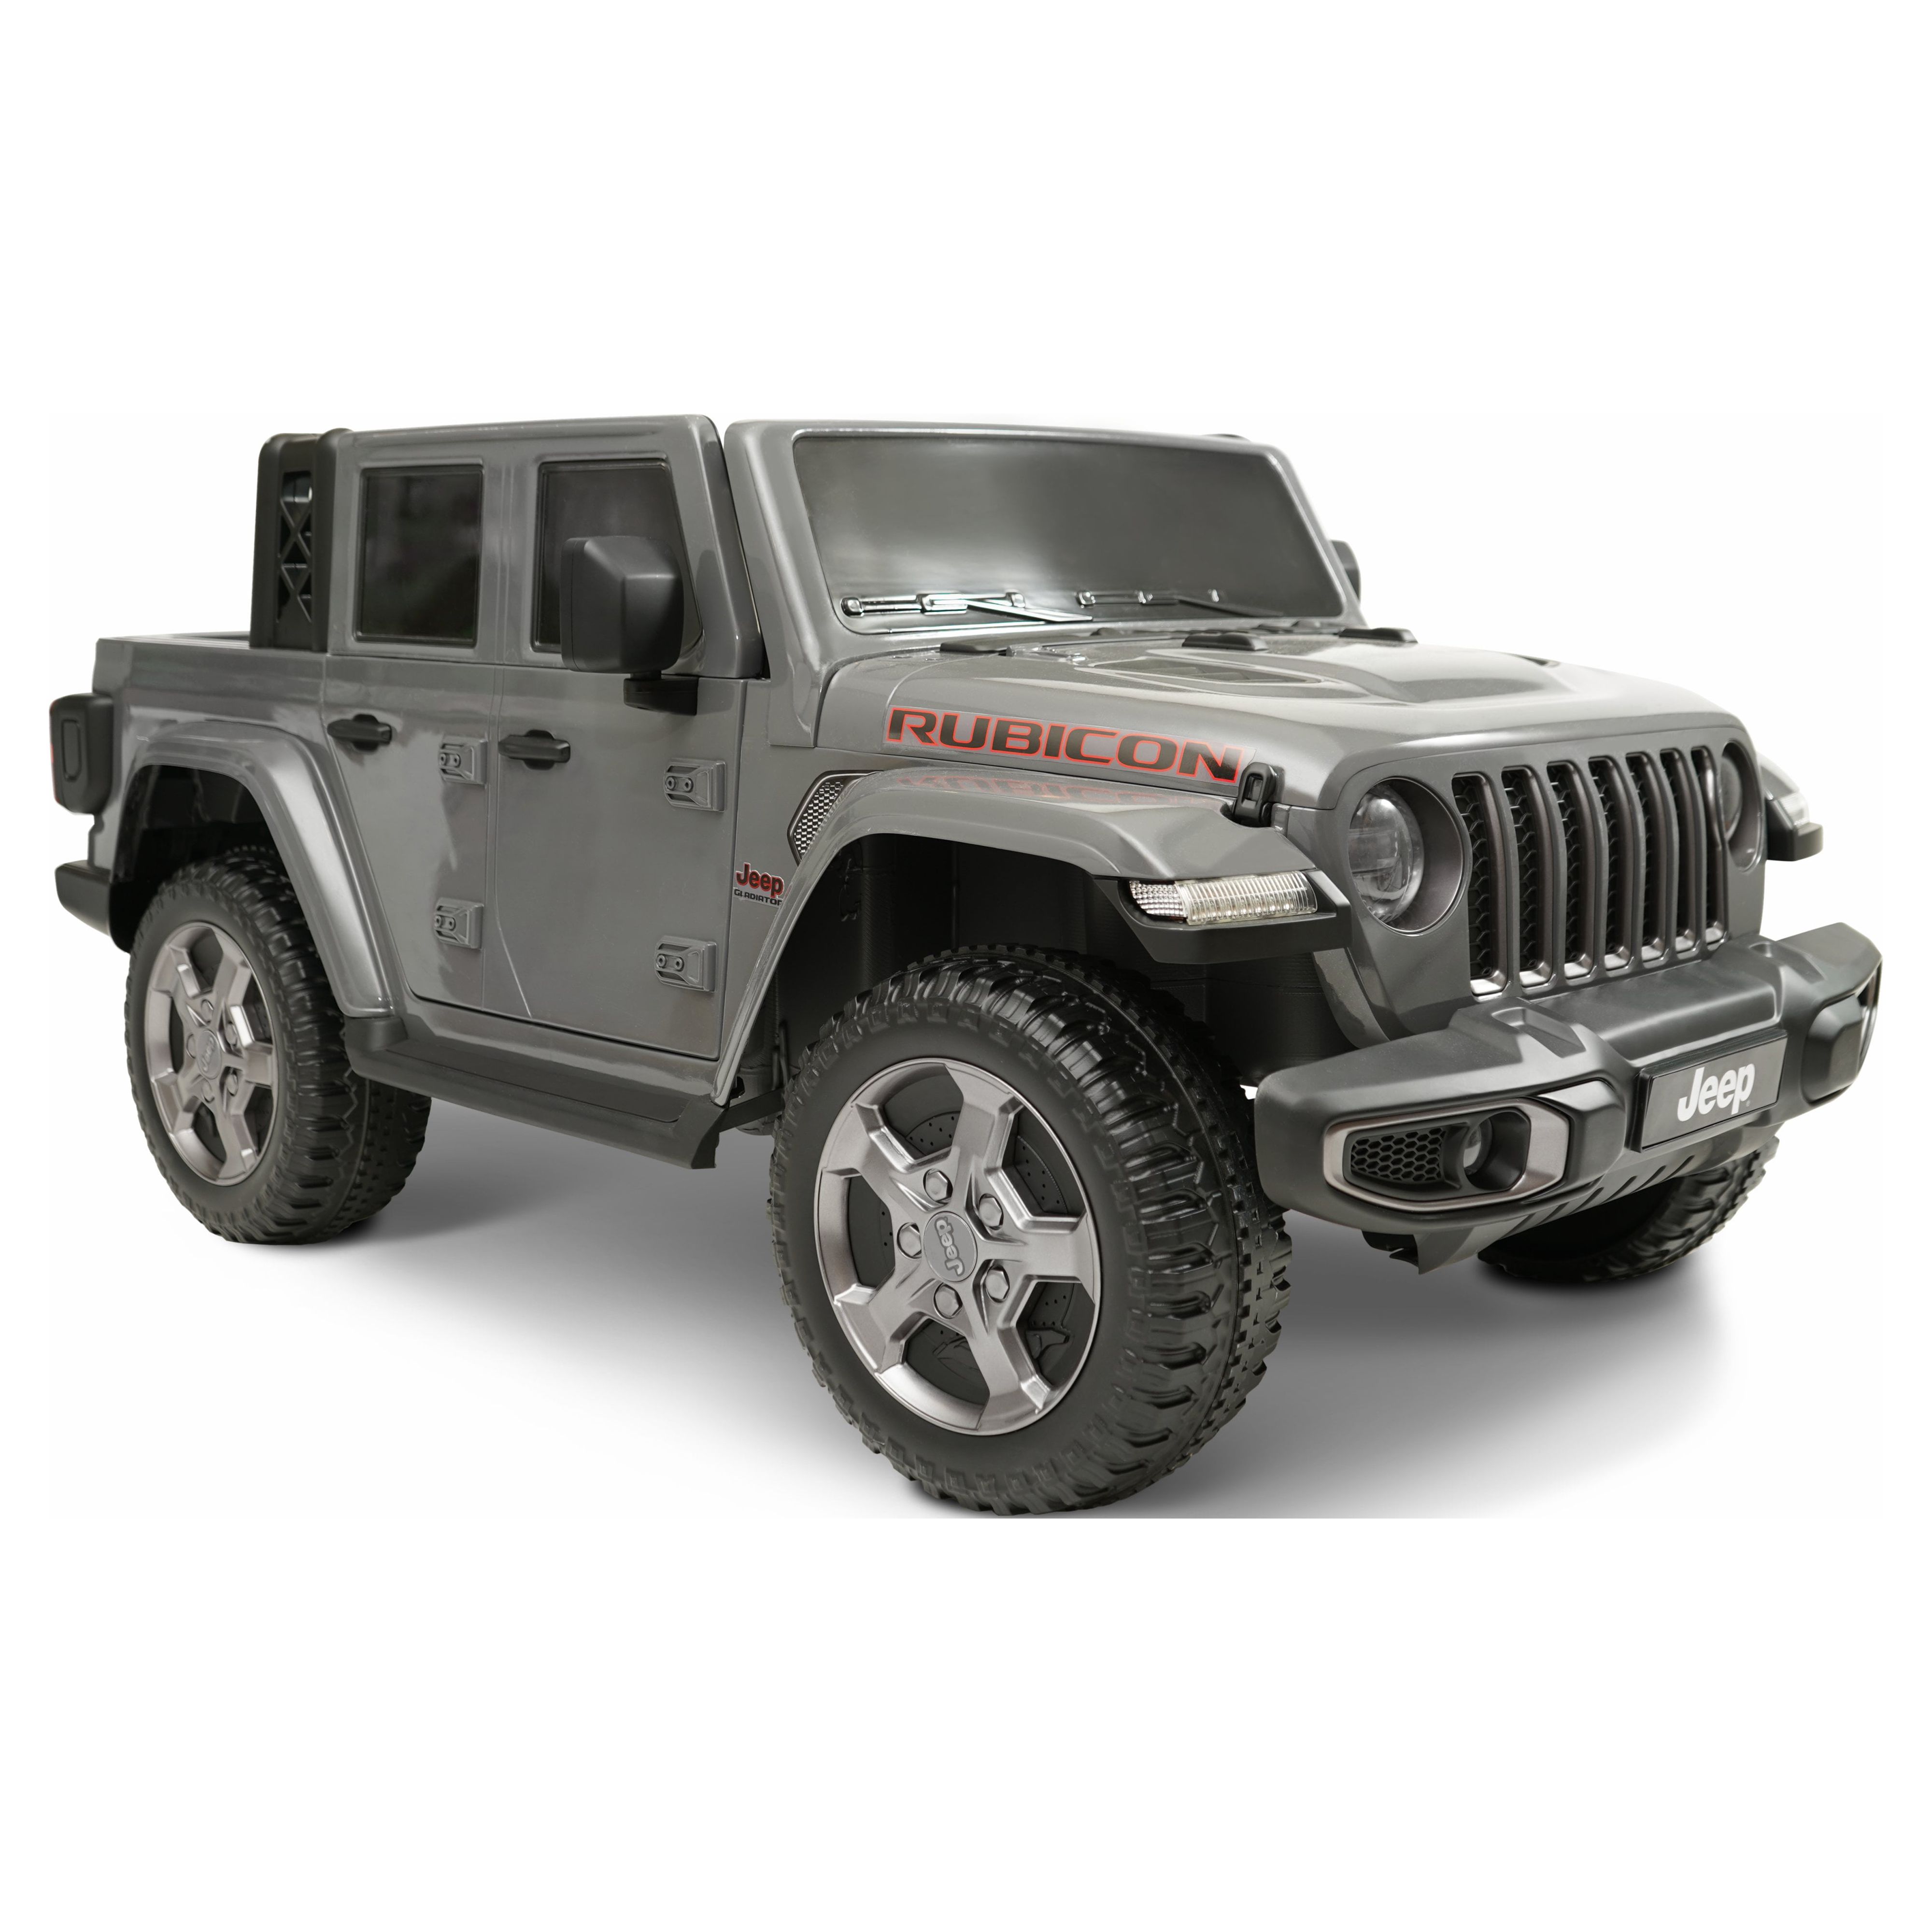 12V Jeep Gladiator Rubicon Battery Powered Ride-on by Hyper Toys, 2-Seater, Gray, for a Child Ages 3-8, Max Speed 5 mph - image 3 of 15